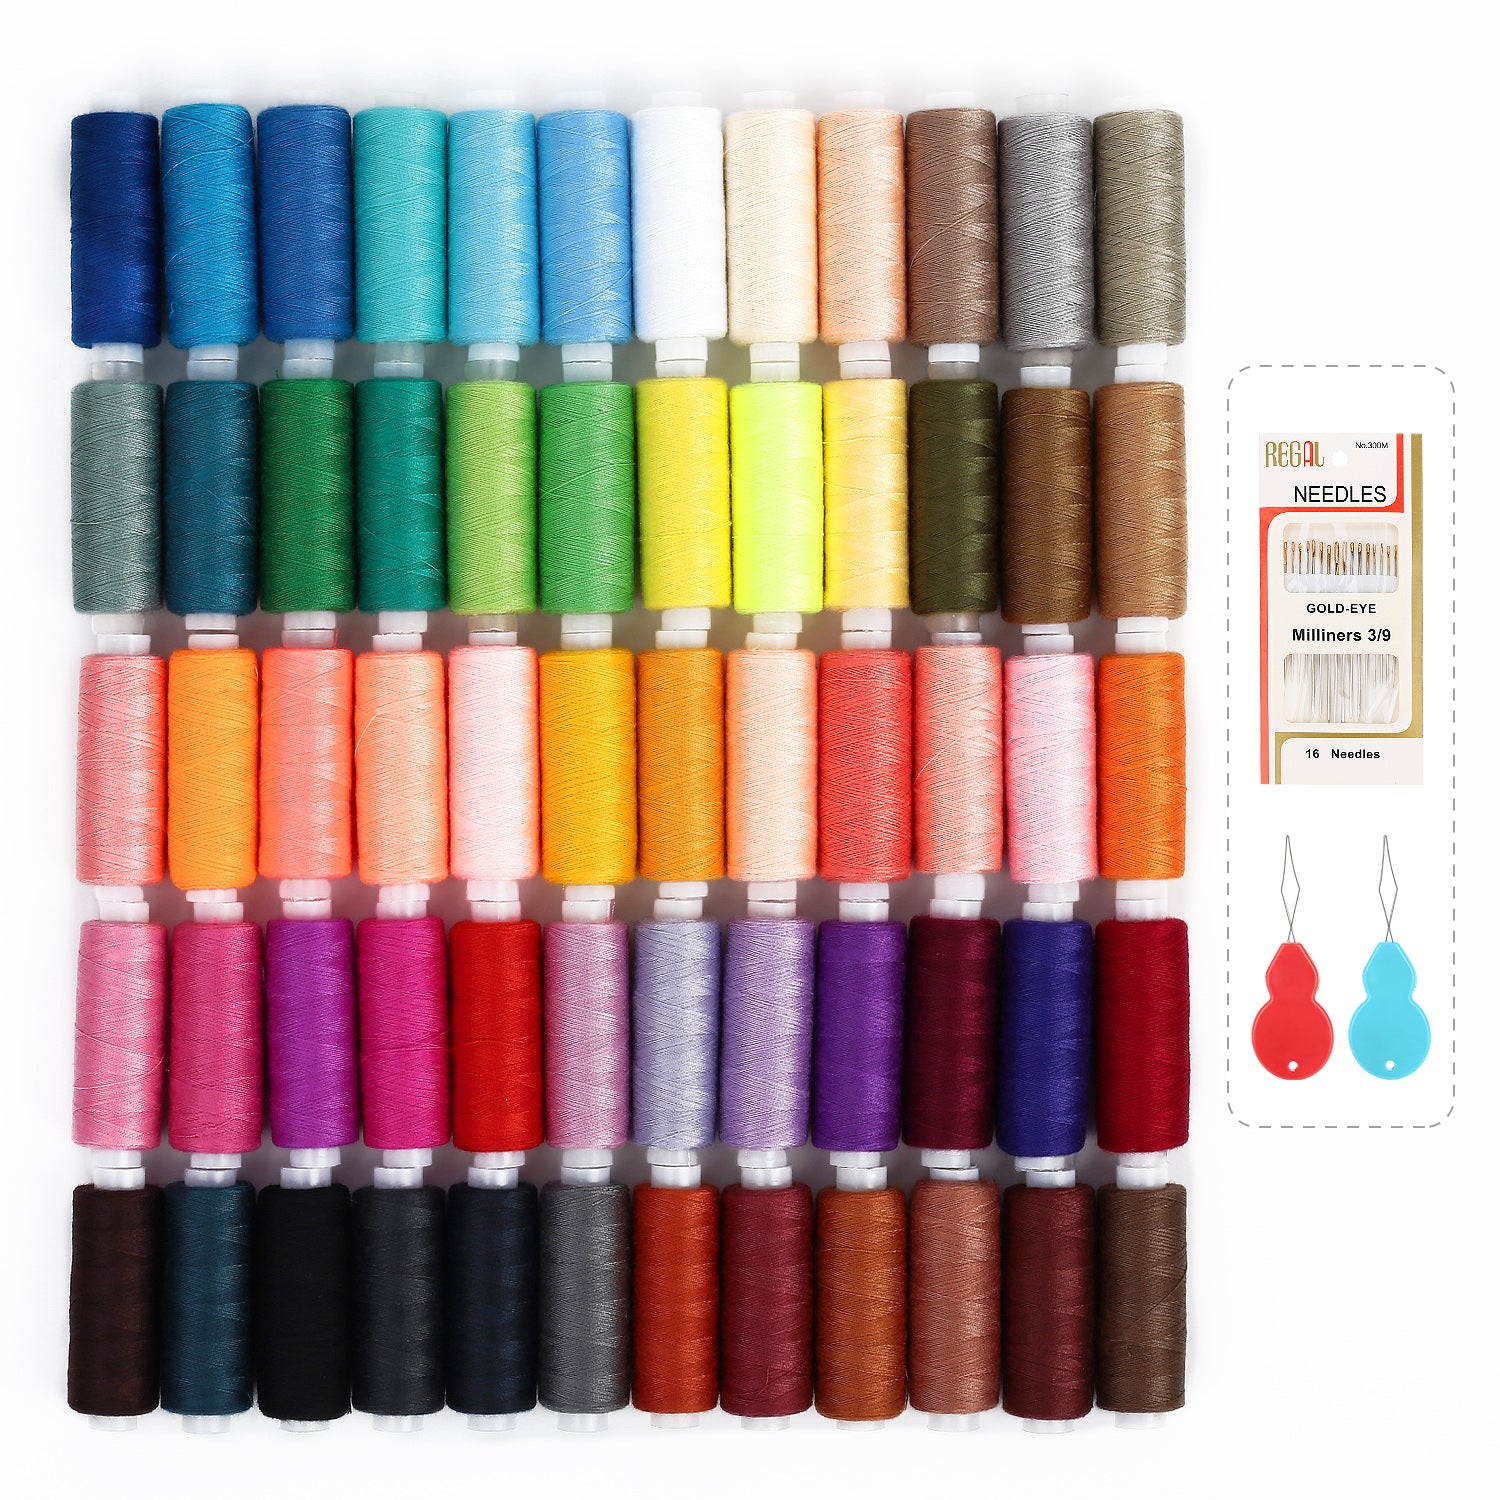 SOLEDI Sewing Thread Set With 60 Colors Polyester